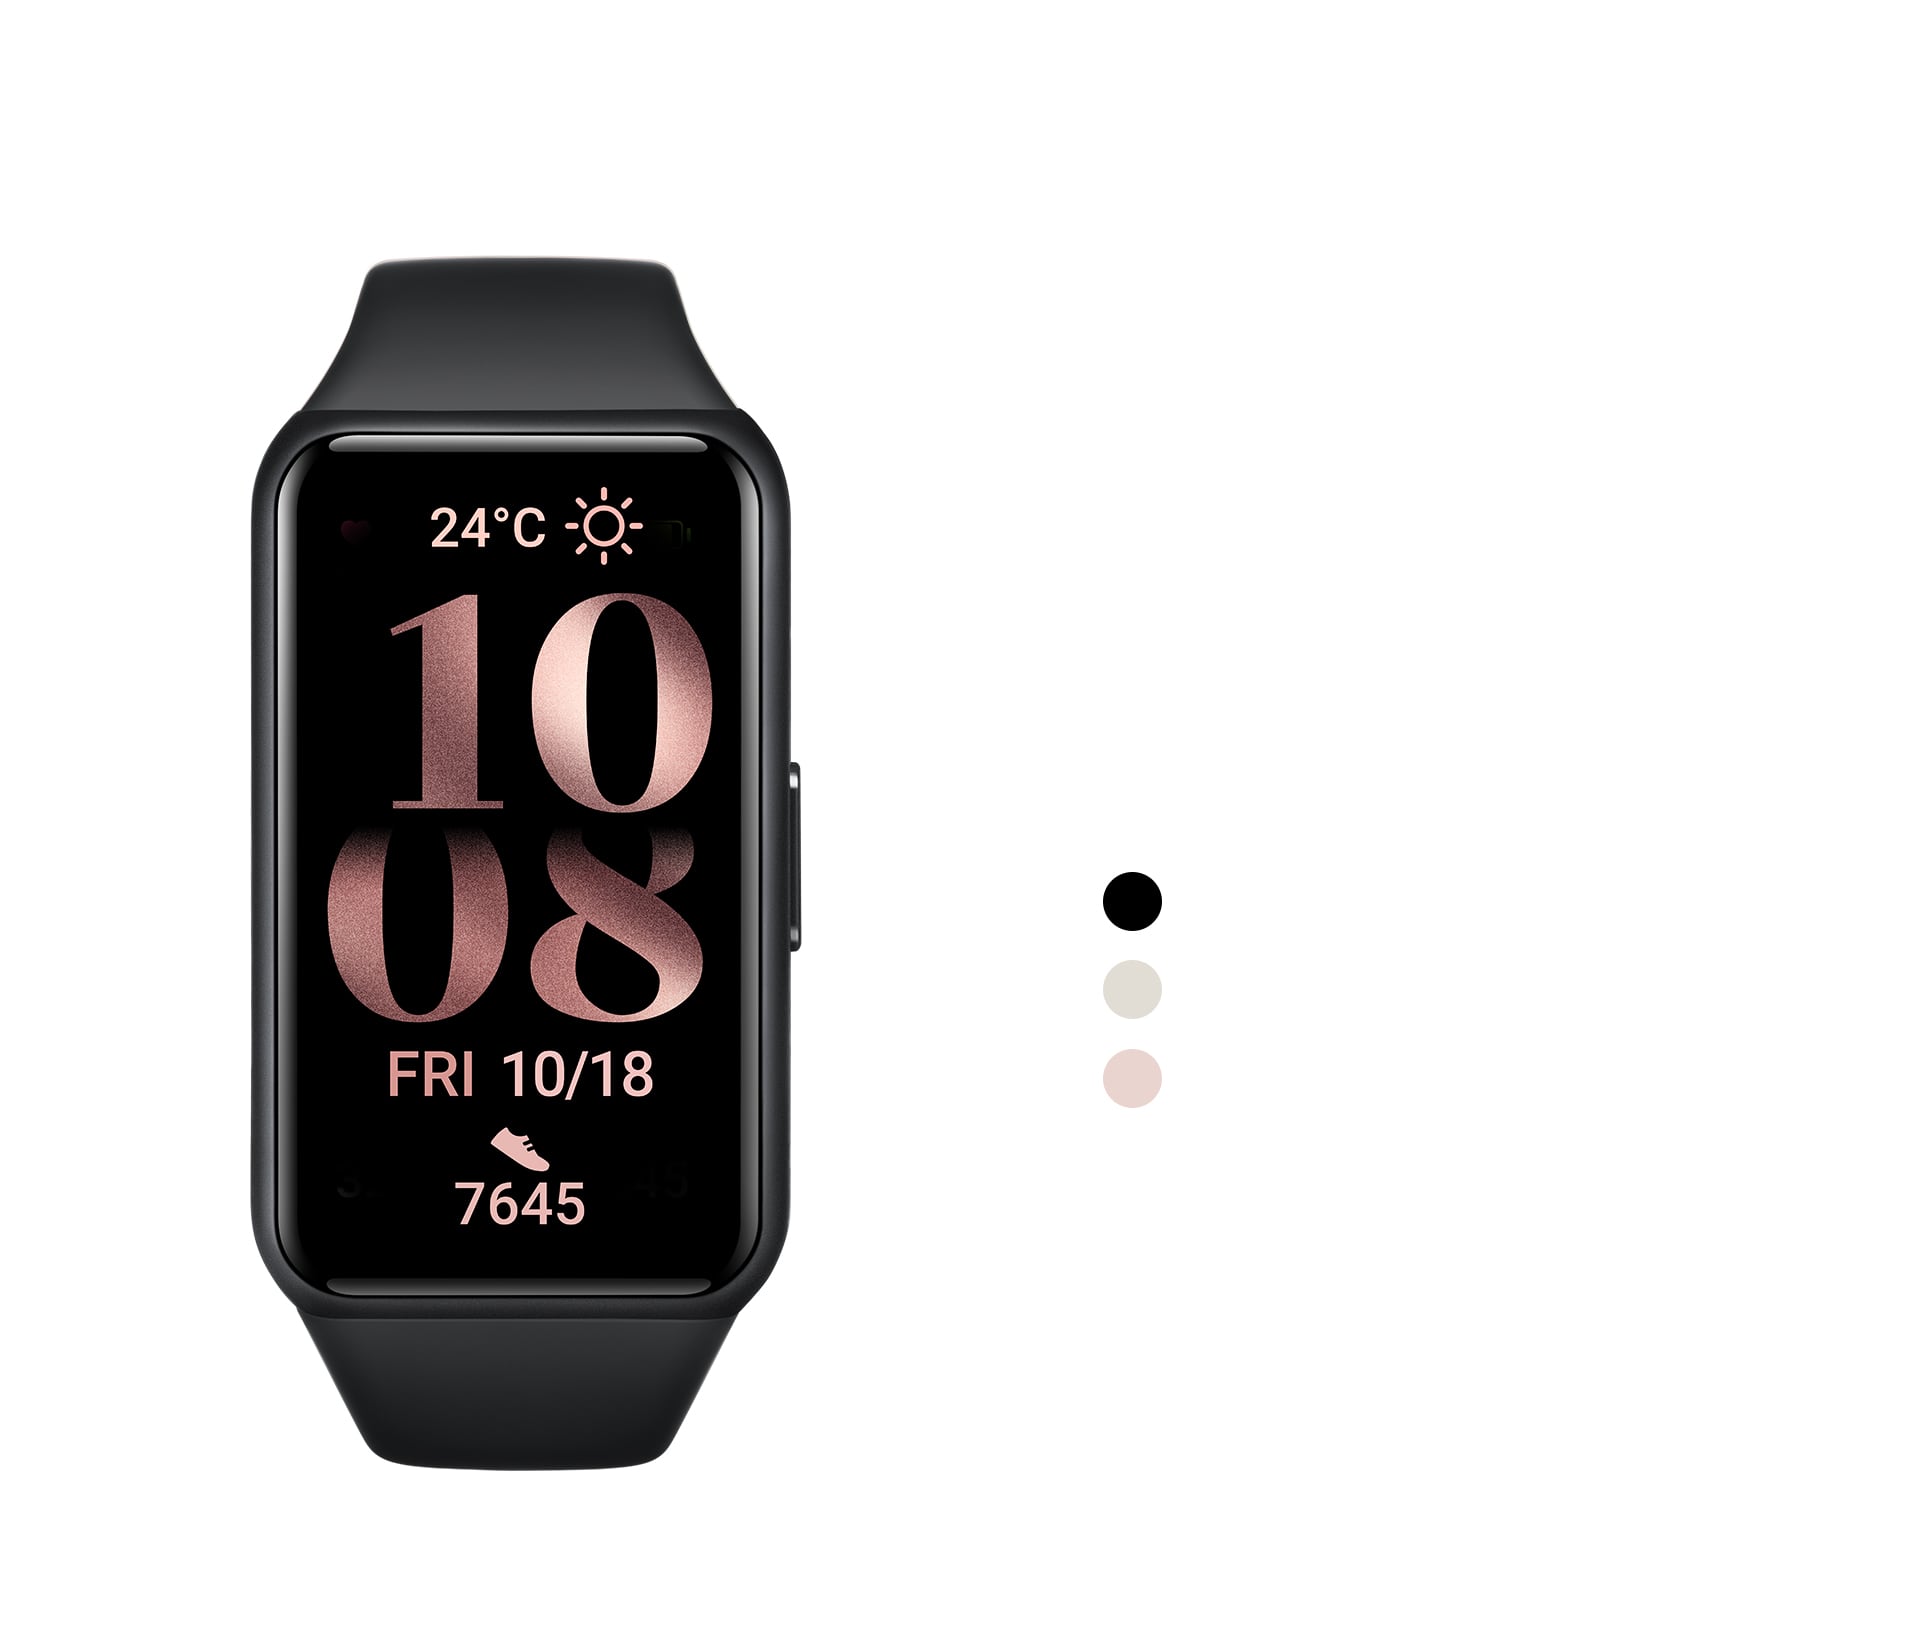 HONOR Band 6 is available in Meteorite Black, Sandstone Grey and Coral Pink